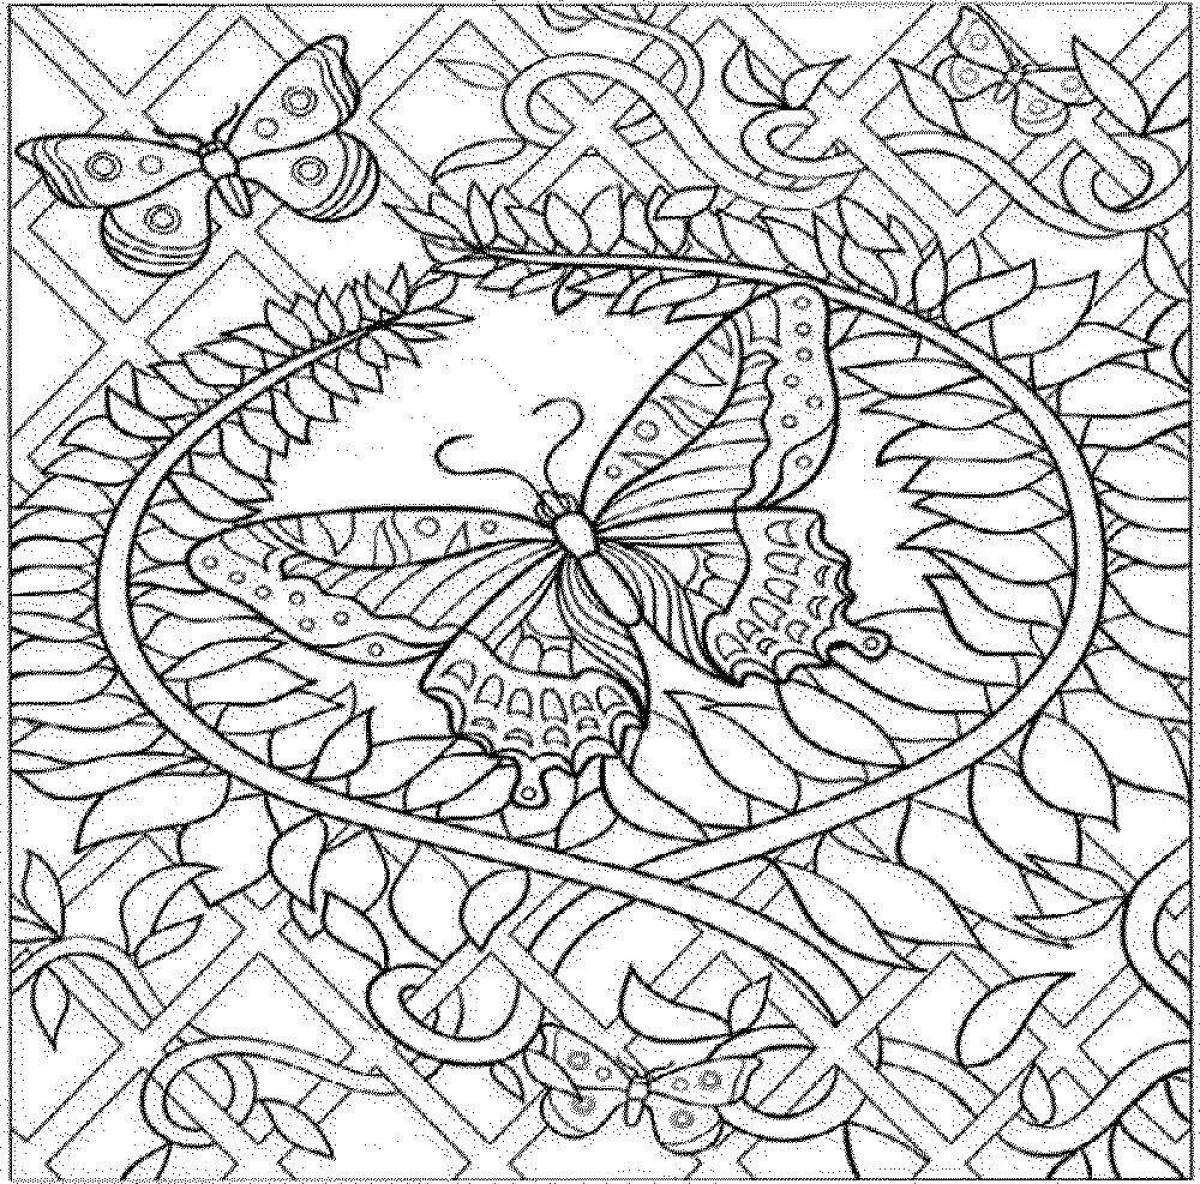 Stimulating coloring book to relax the nervous system